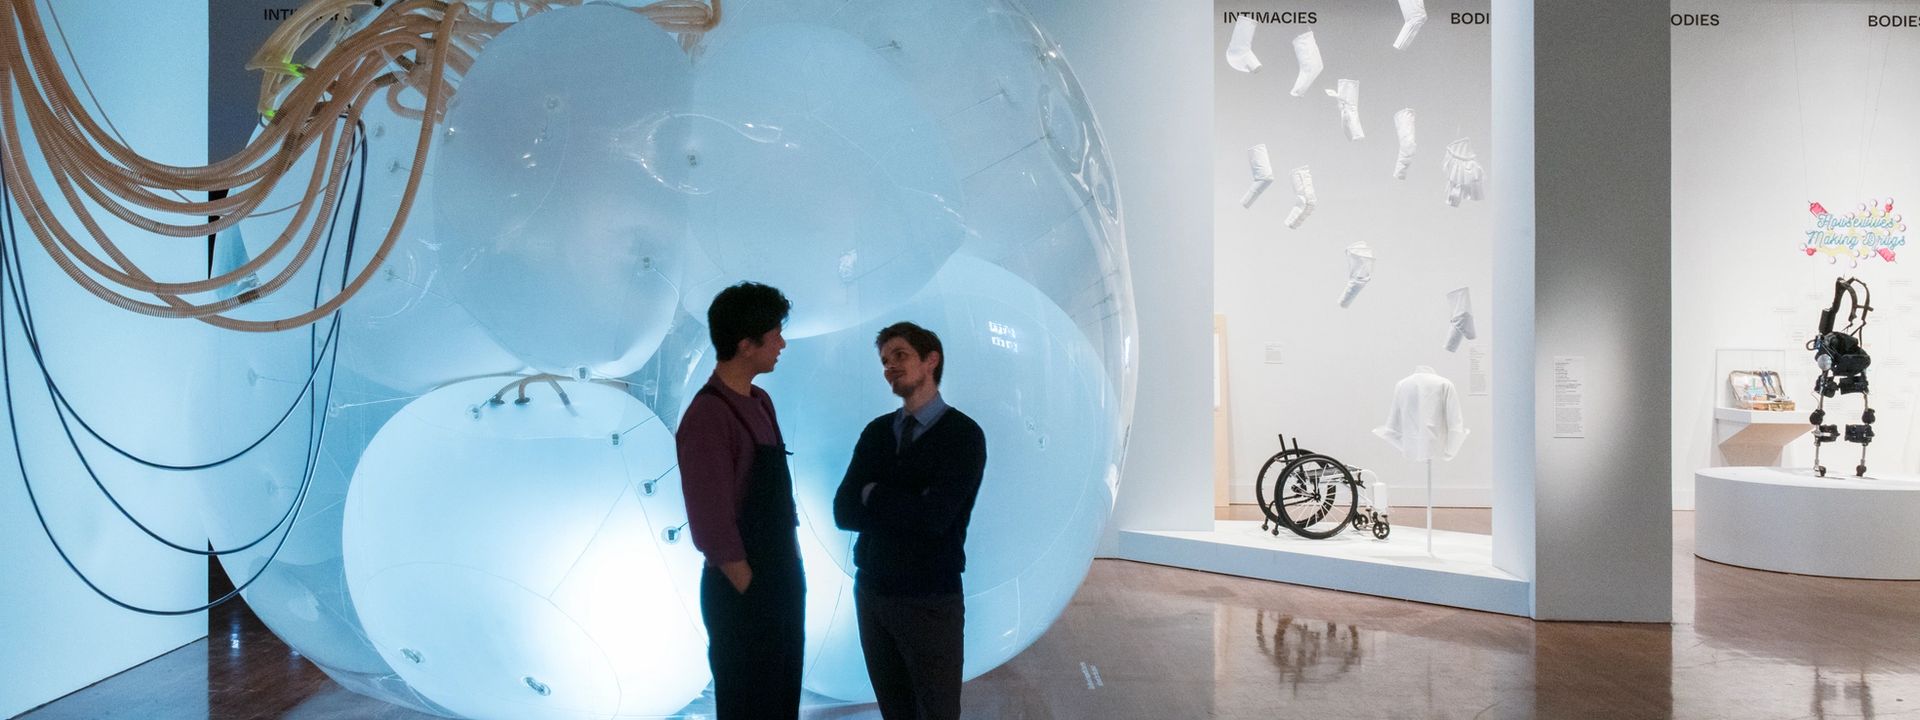 Two visitors standing in front of a large, glowing installation